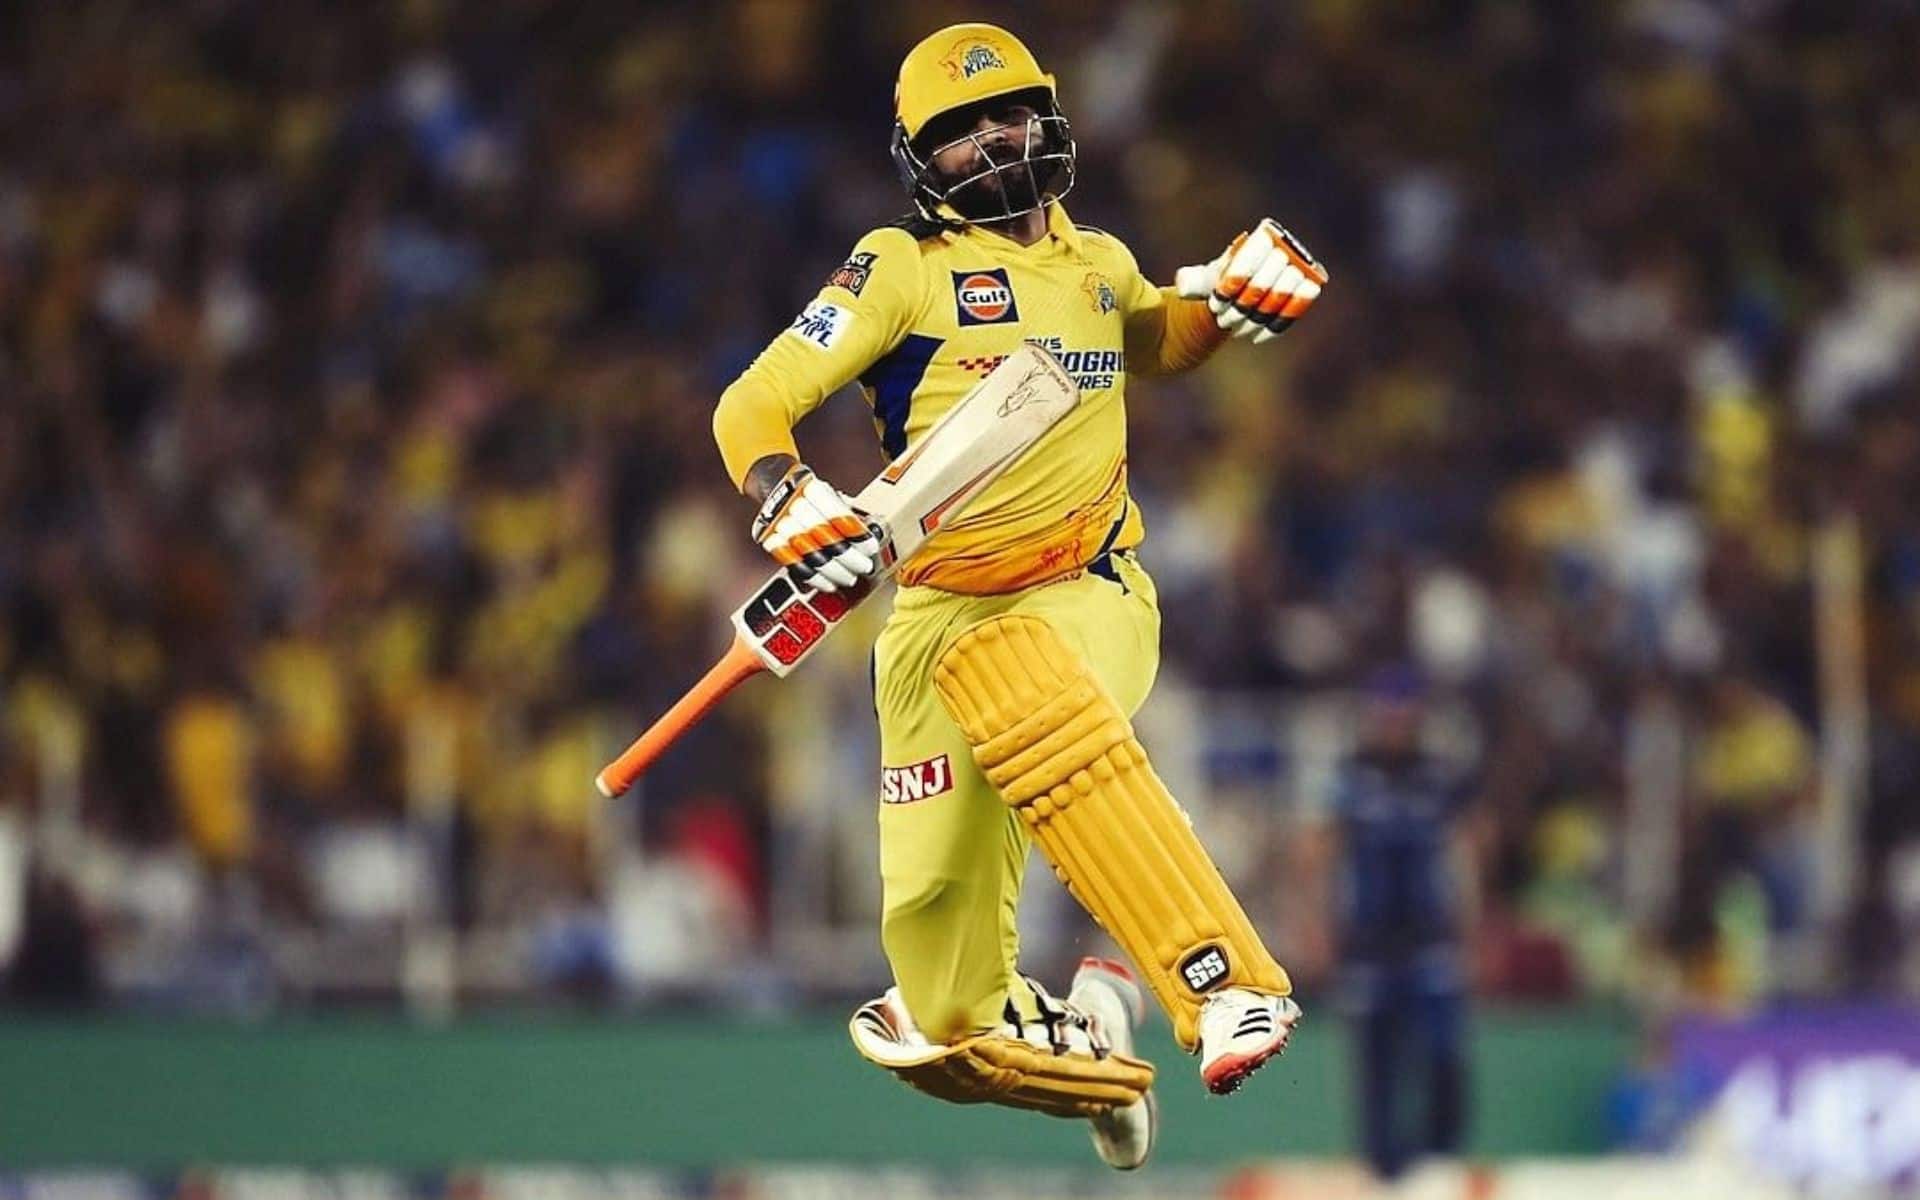 Ravindra Jadeja has the third most sixes in 20th over in the IPL (X.com)